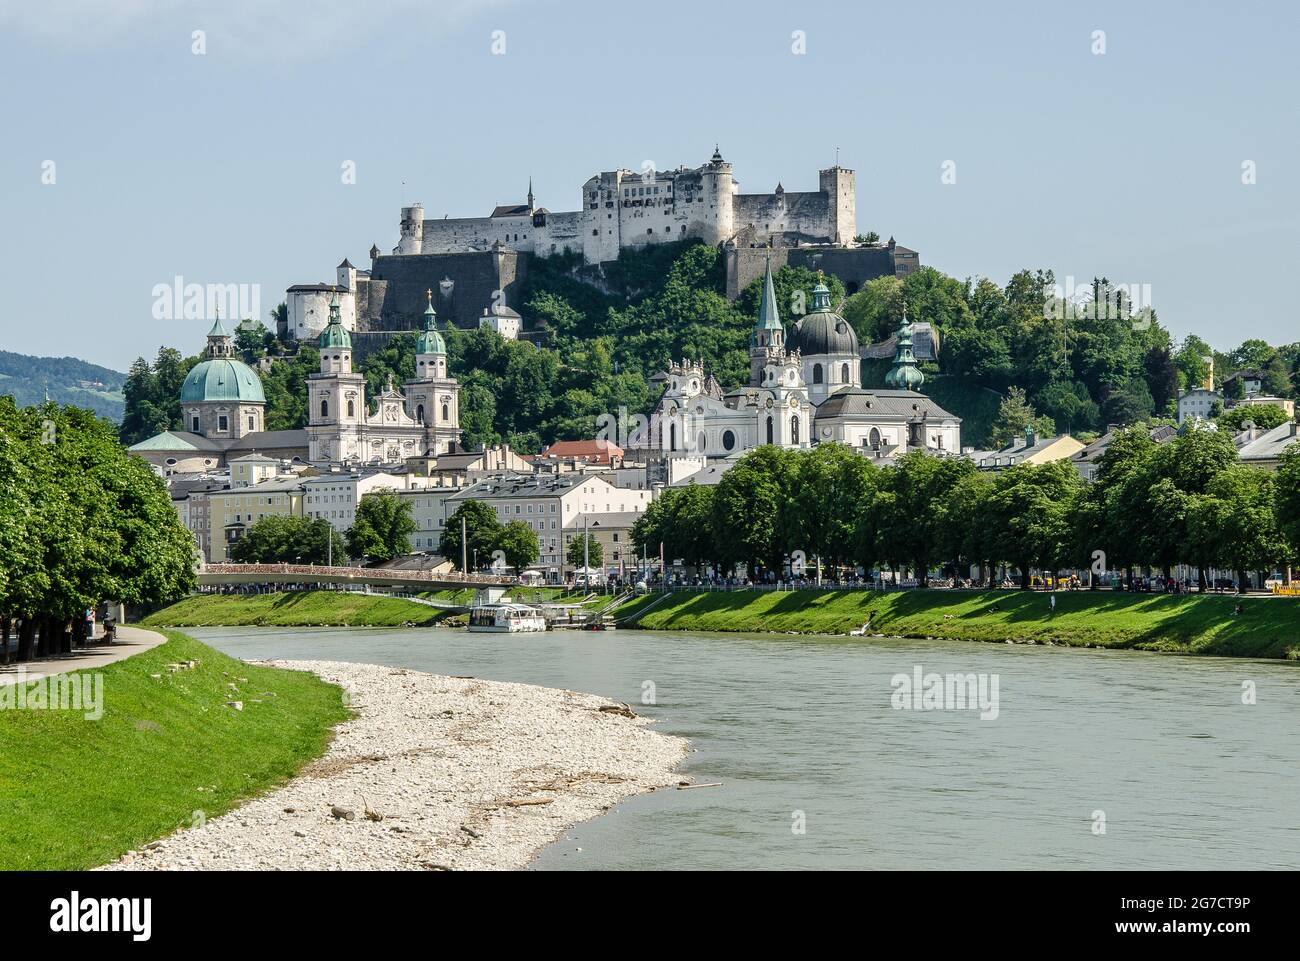 The cityscape of Salzburg as seen from the Salzach River Stock Photo